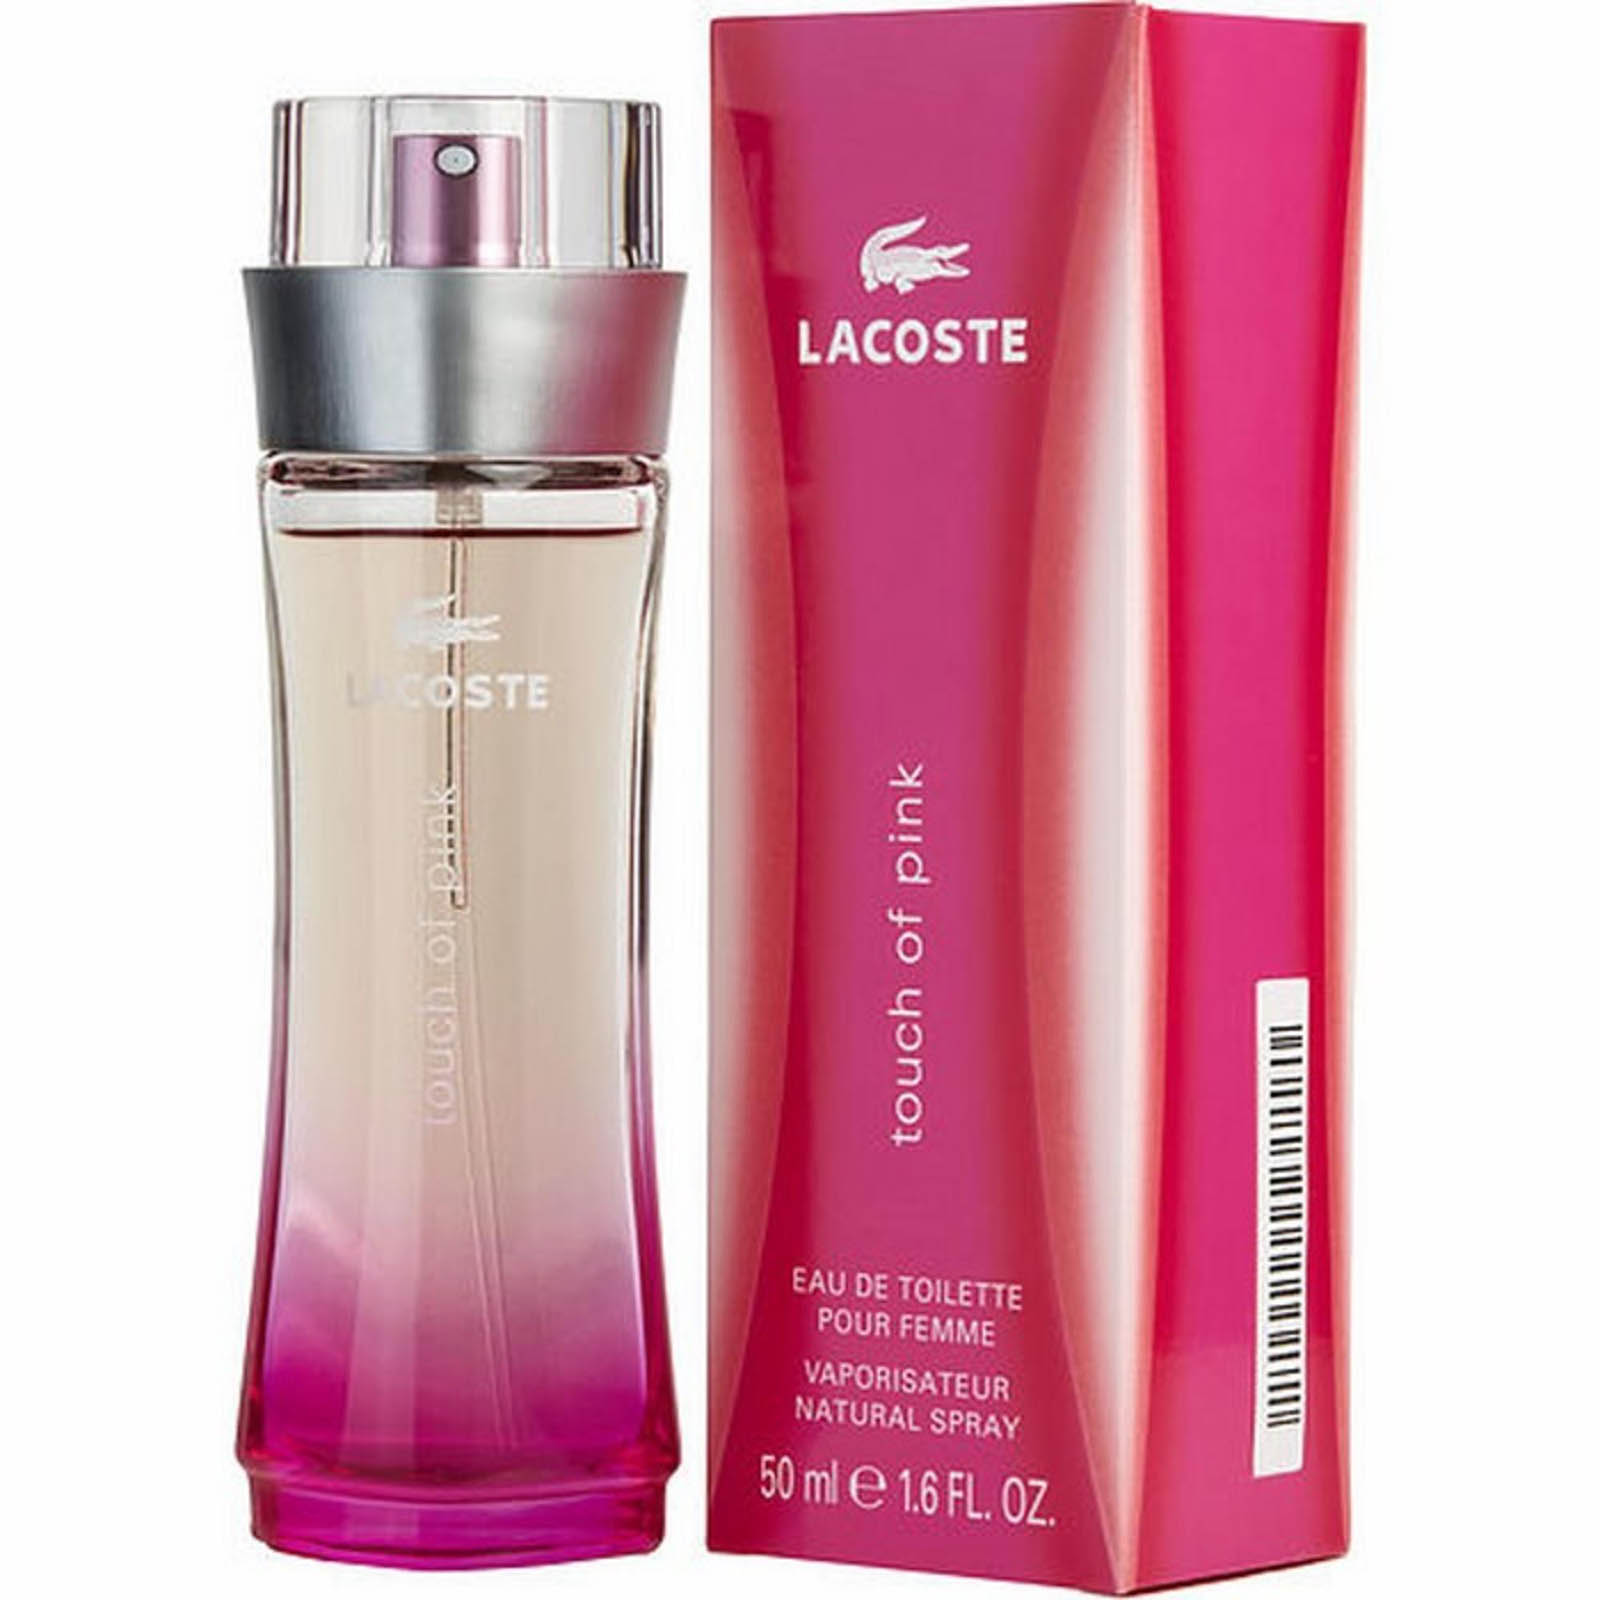 Продажа туалетной воды. Lacoste Touch of Pink w 90ml Premium. Lacoste Touch of Pink 90ml. Lacoste Touch of Pink. Lacoste Touch of Pink (l) EDT 90ml.